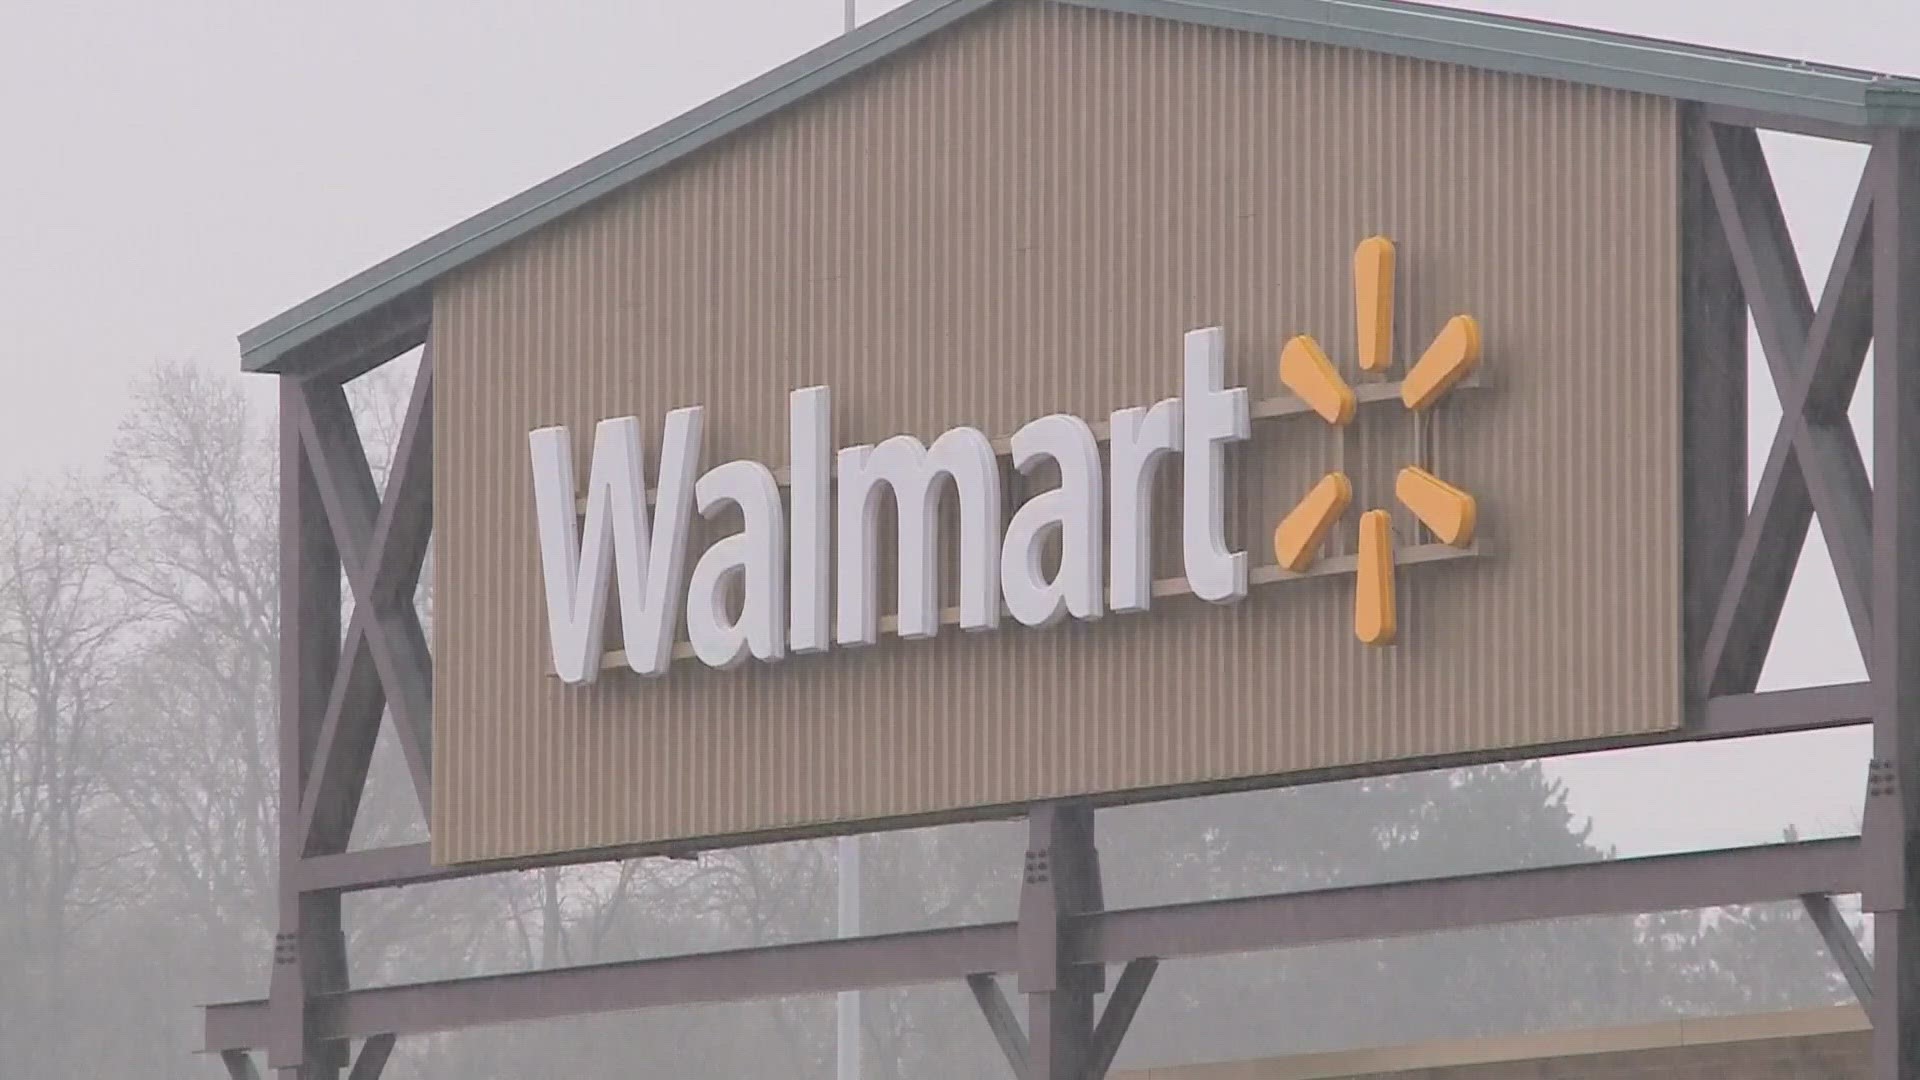 Cleveland police located the woman at Walmart and confirmed she did not have a bomb.